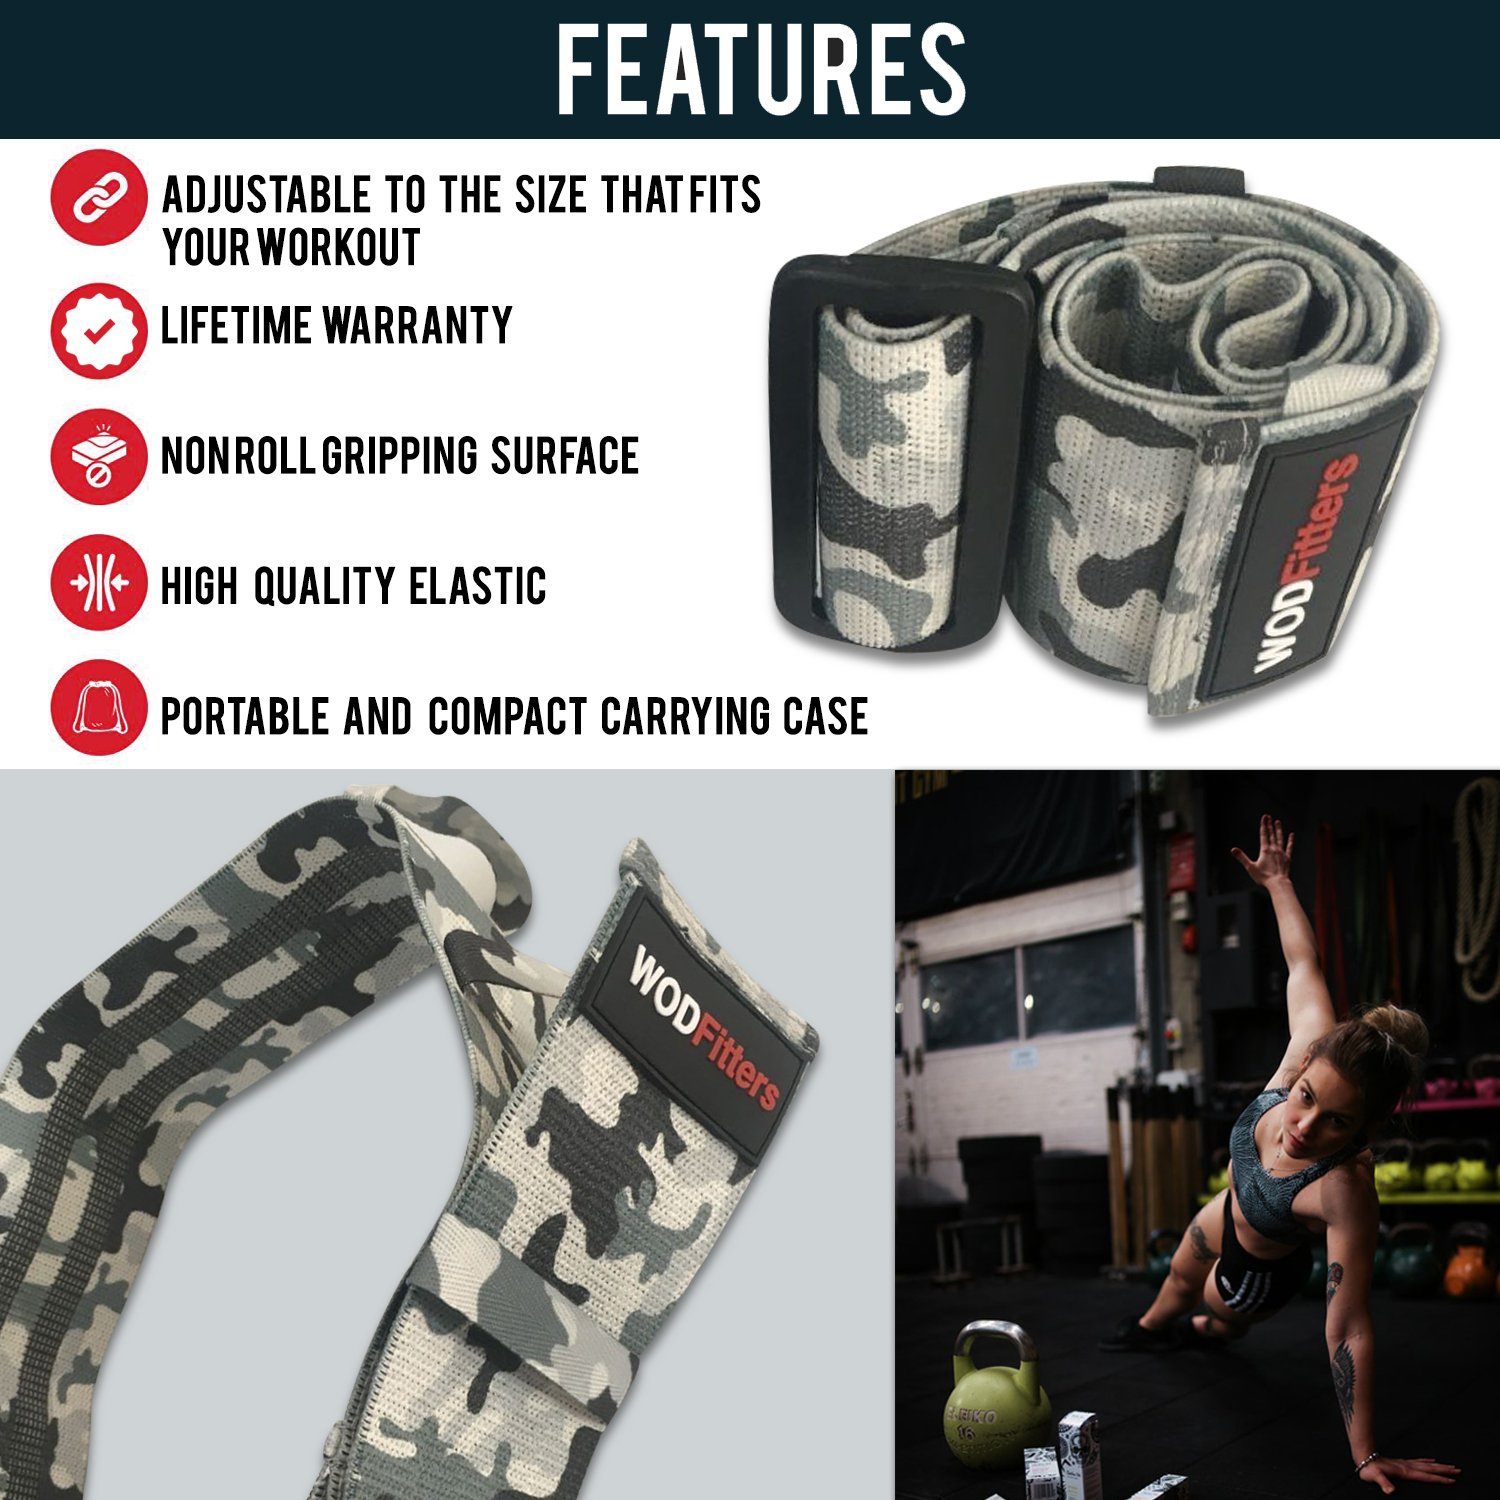 Adjustable Tactical Hip Band - Choose Camo or Black - One Band to Replace 3 Bands - Adjustable From 13” up to 17” 